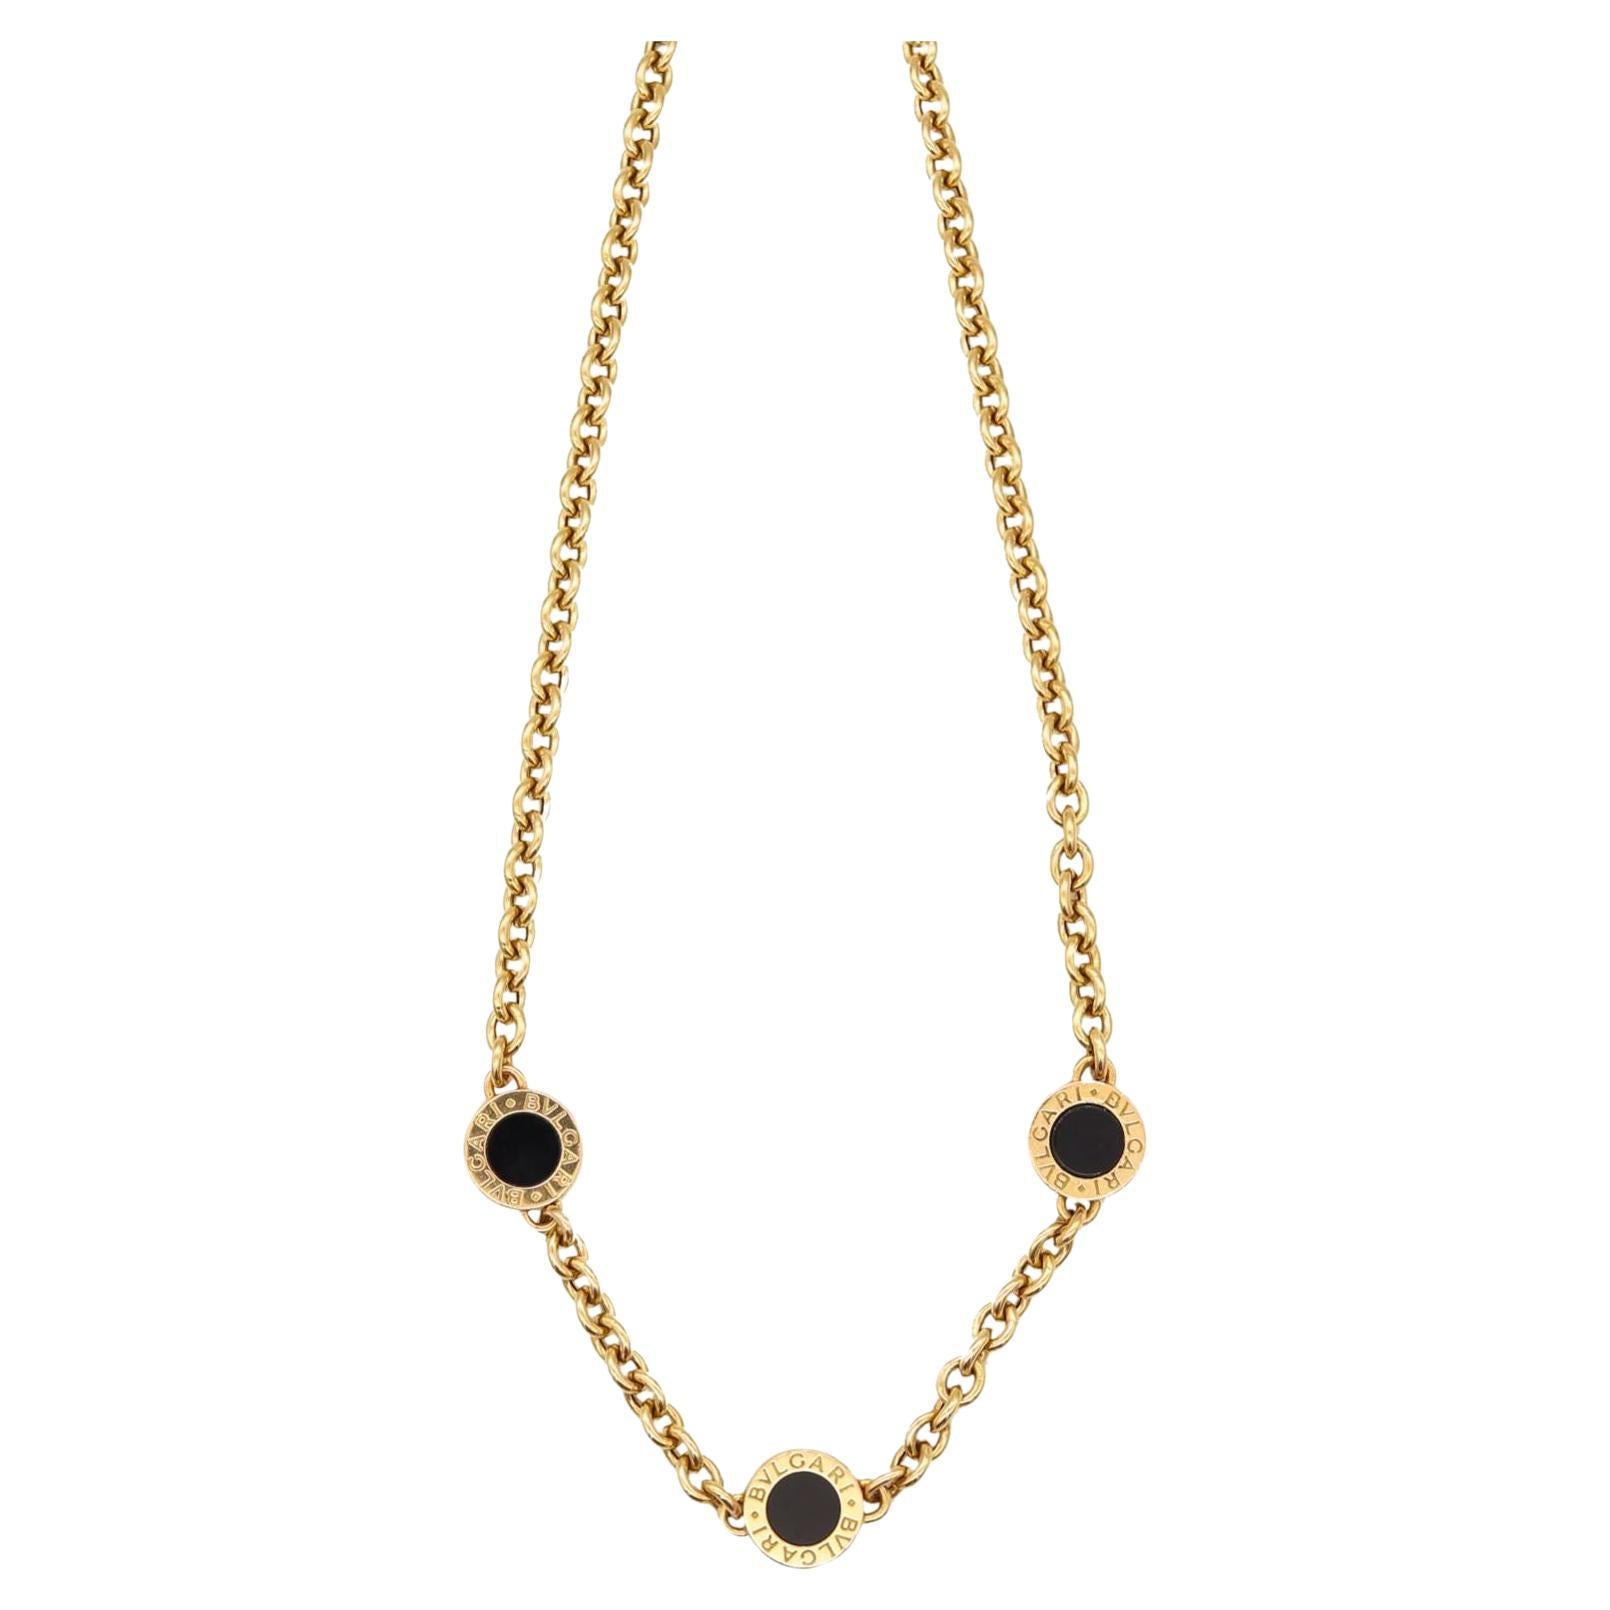 Bvlgari Roma Pendant Links Necklace in 18Kt Yellow Gold with 3 Black Onyxes